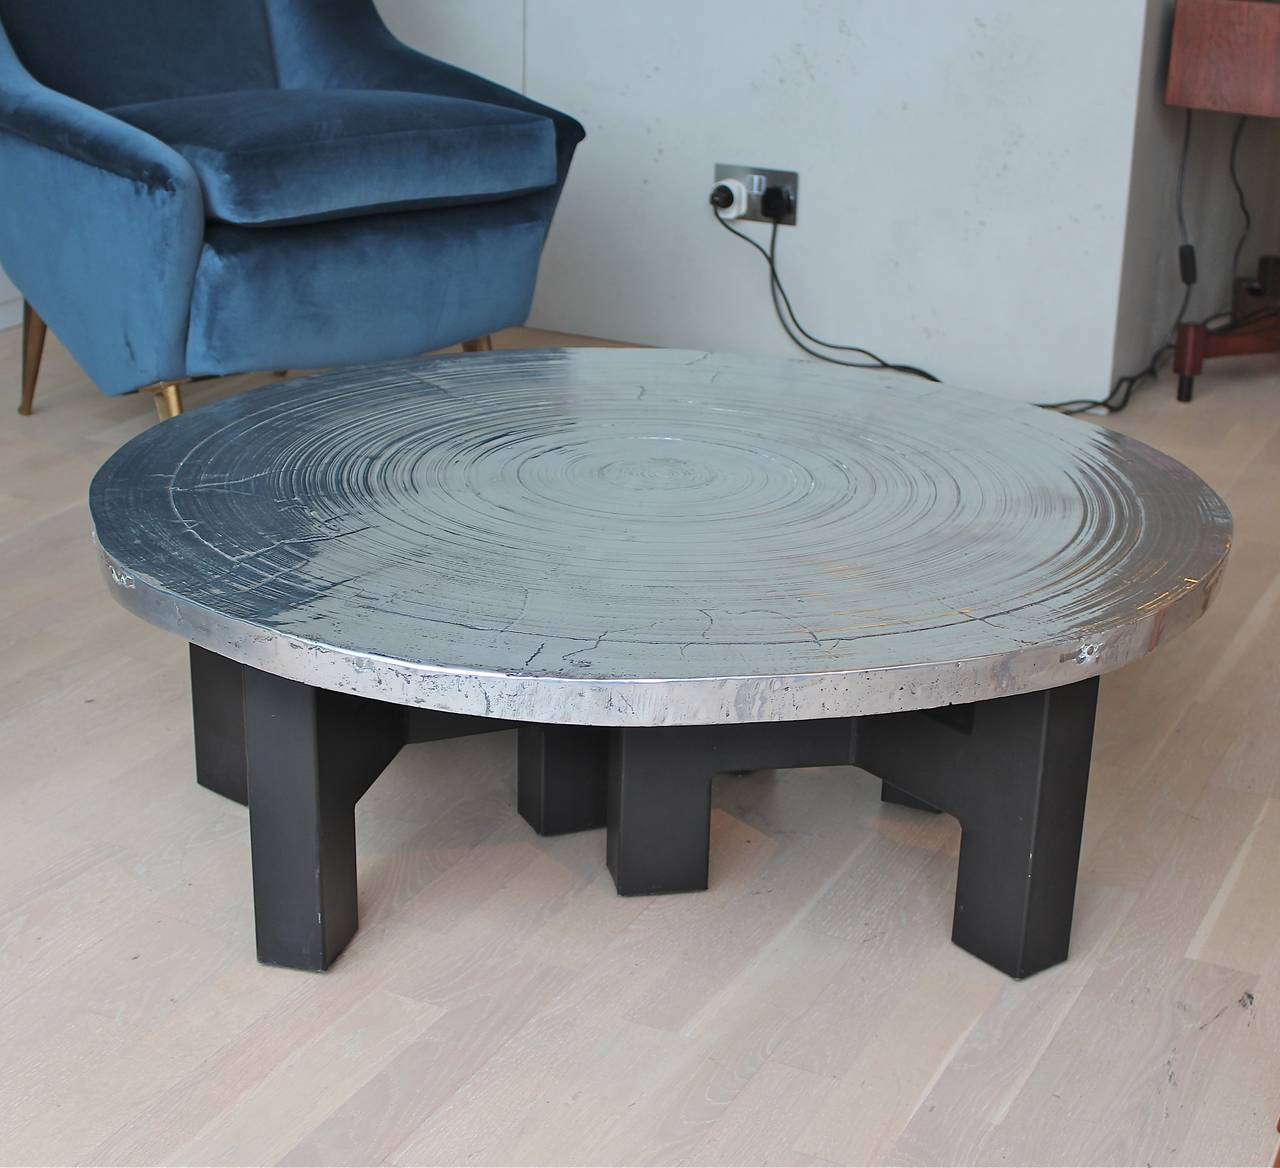 Rare 'Maya Soleil' table in cast aluminium with lacquered metal feet by Ado Chale.
An early vintage example of the 'Maya Soleil' table (also known as Goutte d'Eau'), on the edge of the top it is both signed and impressed with a small